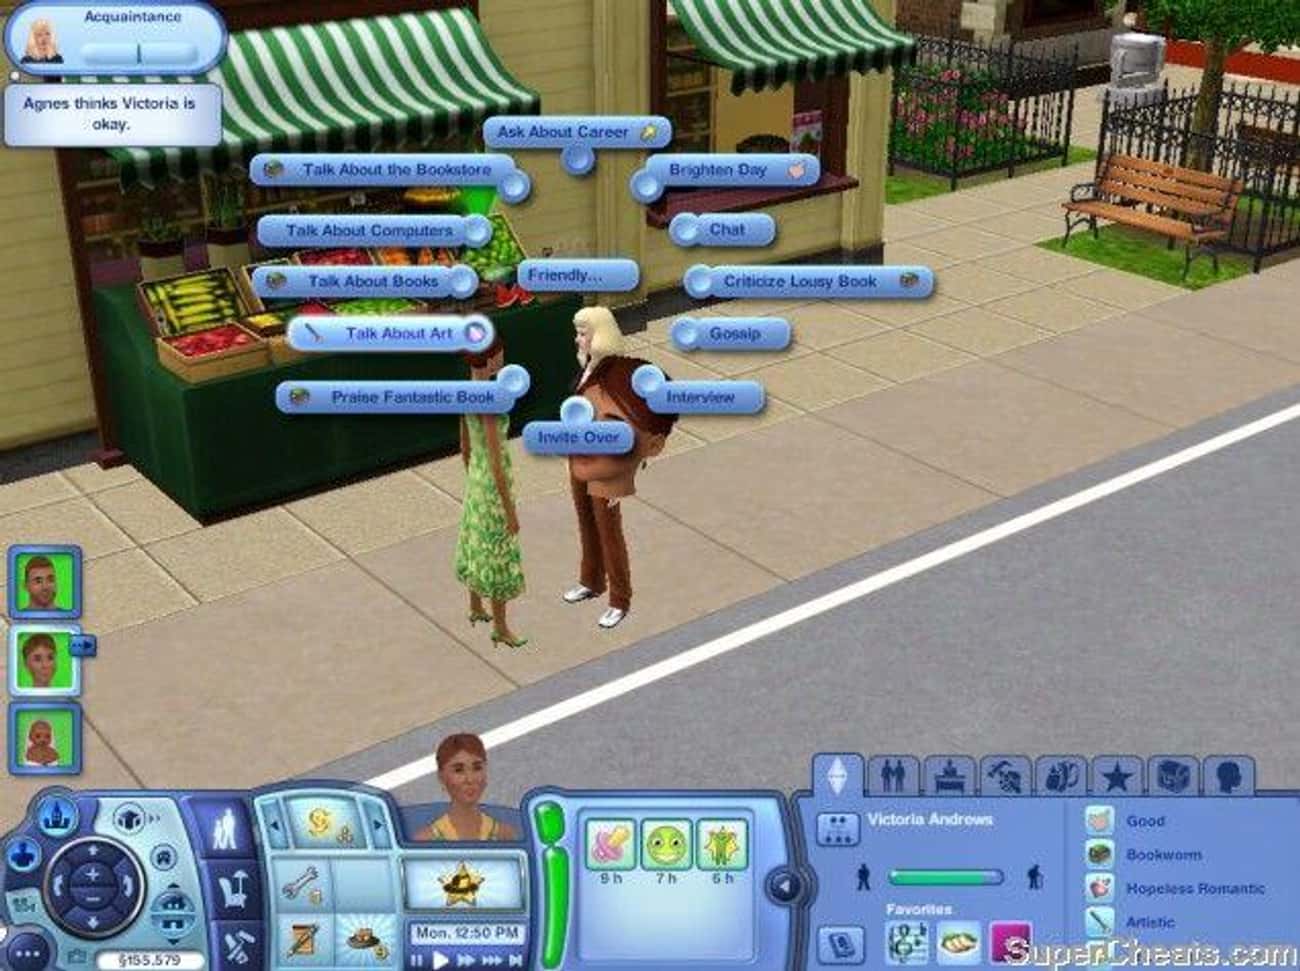 'The Sims' Players Are Controlling